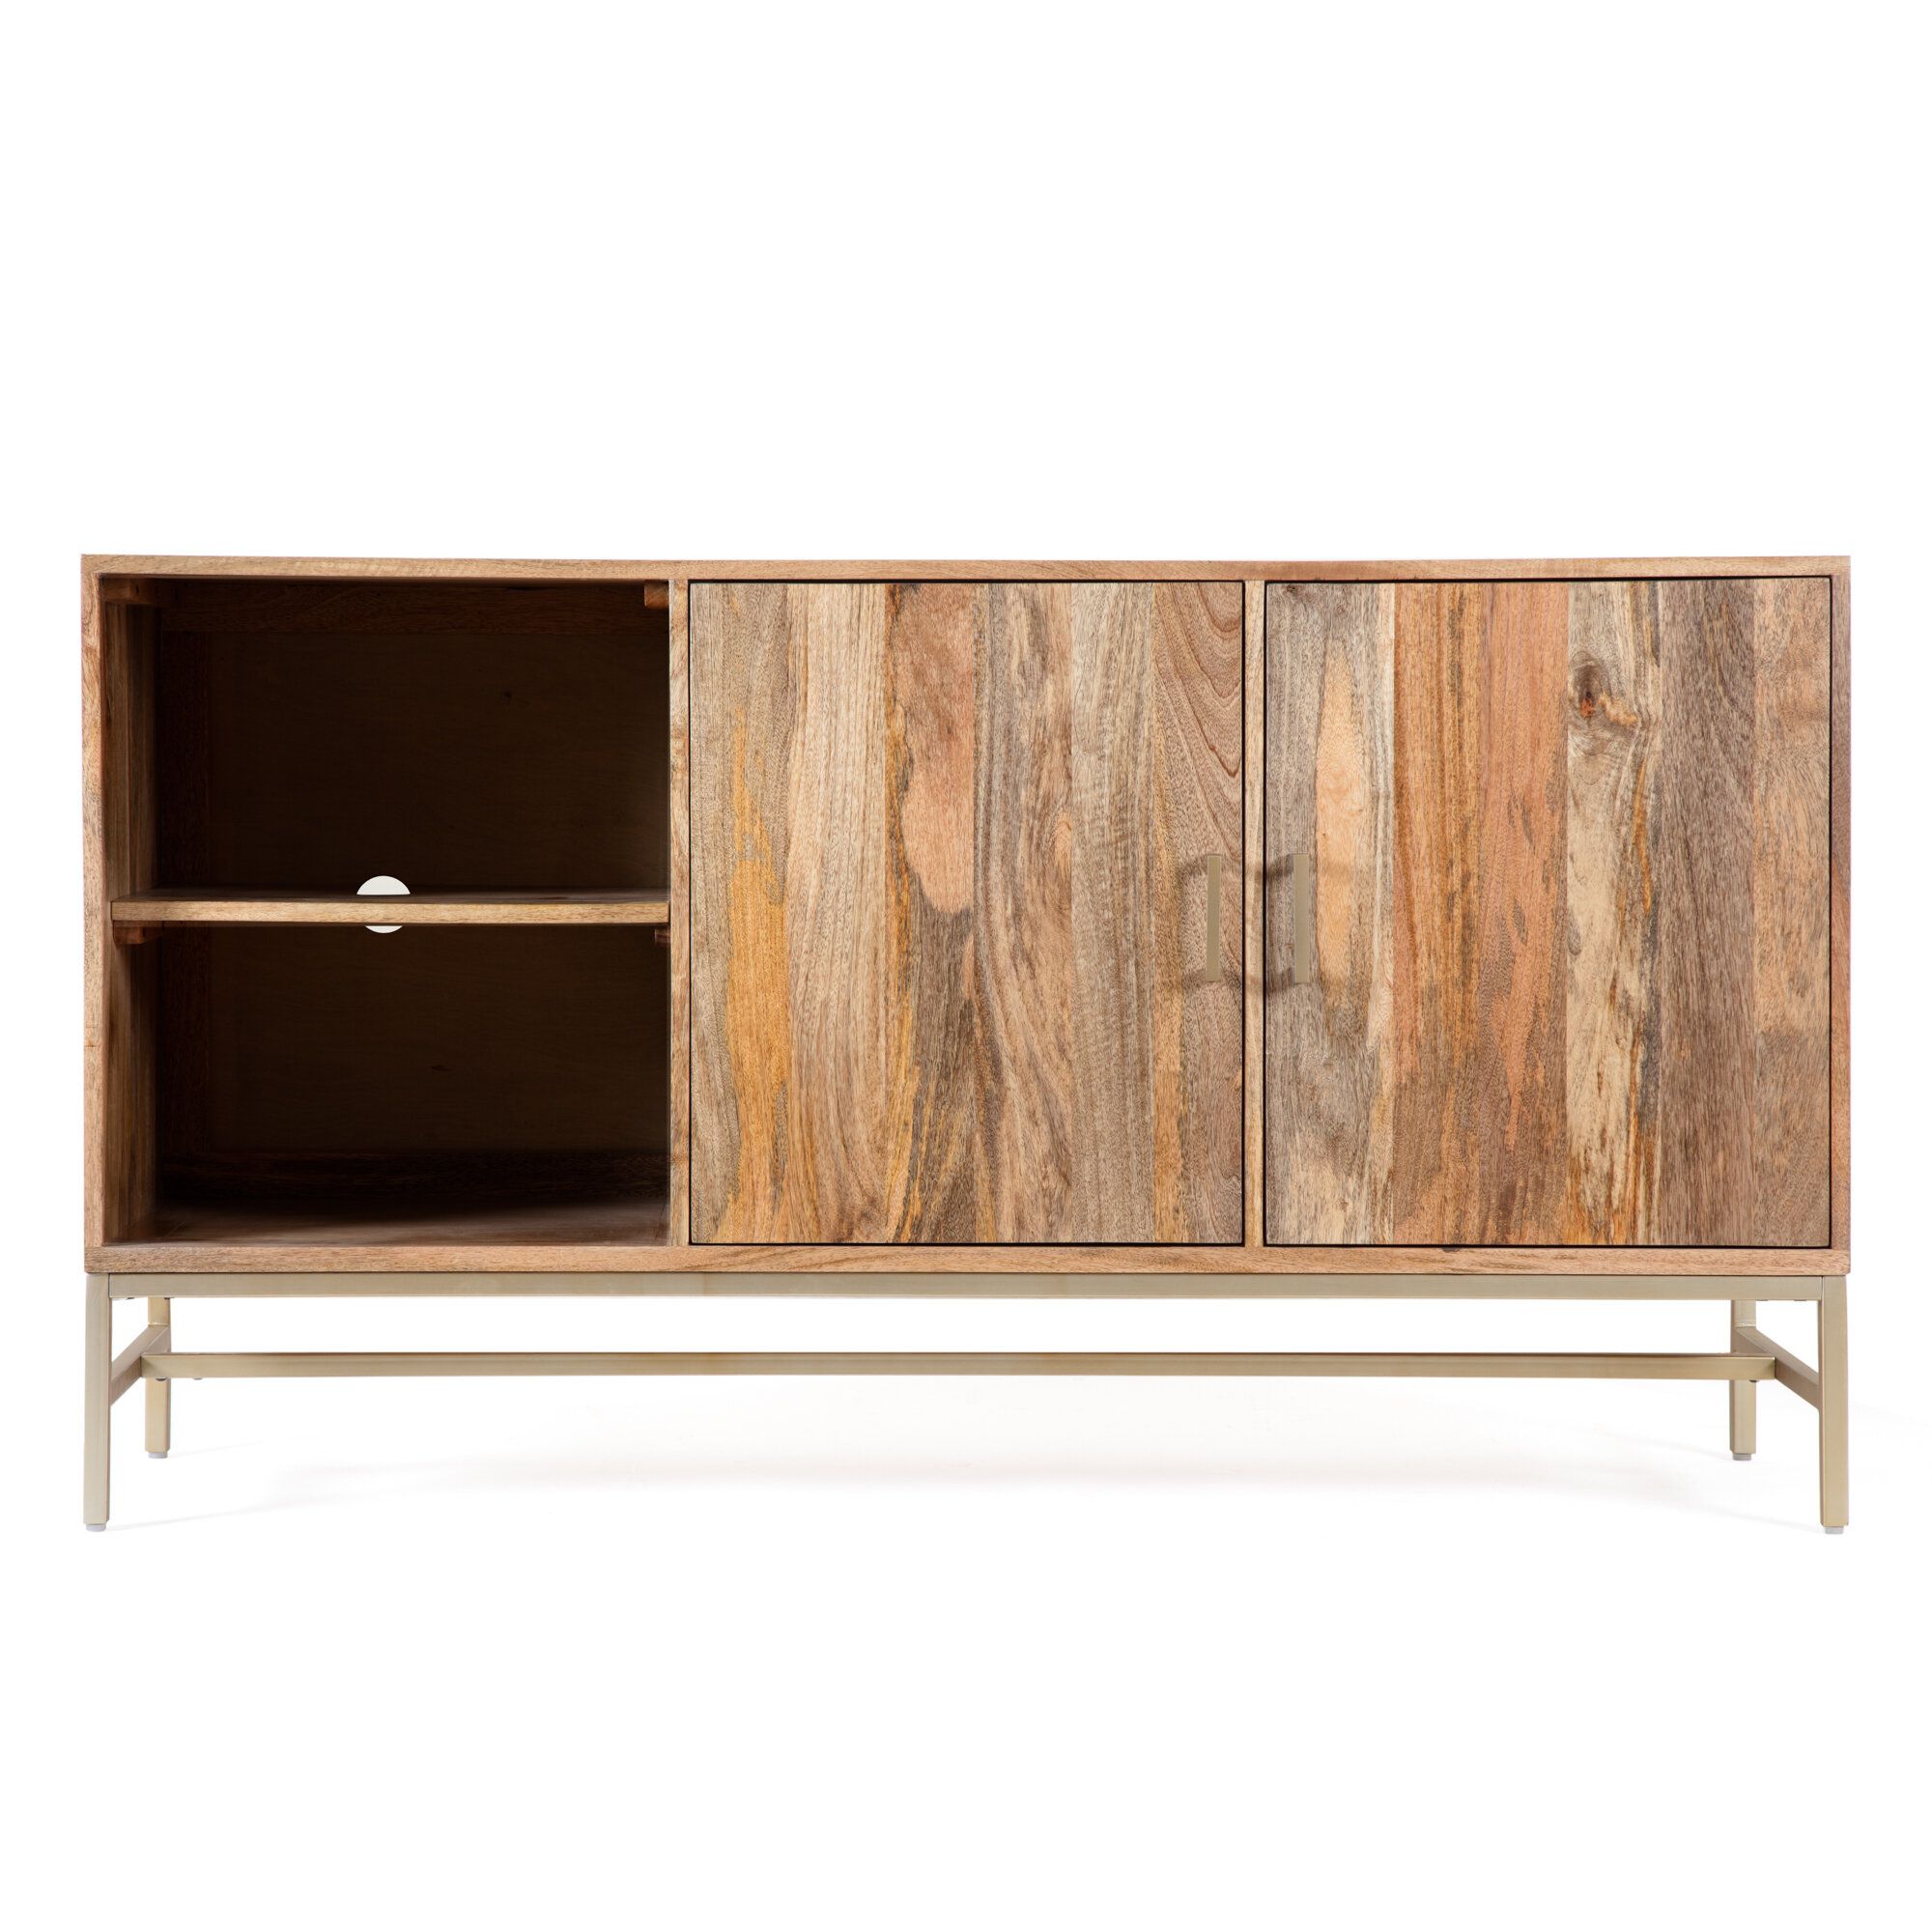 Modern & Contemporary Media Credenza | Allmodern Throughout Most Up To Date Errol Media Credenzas (View 16 of 20)